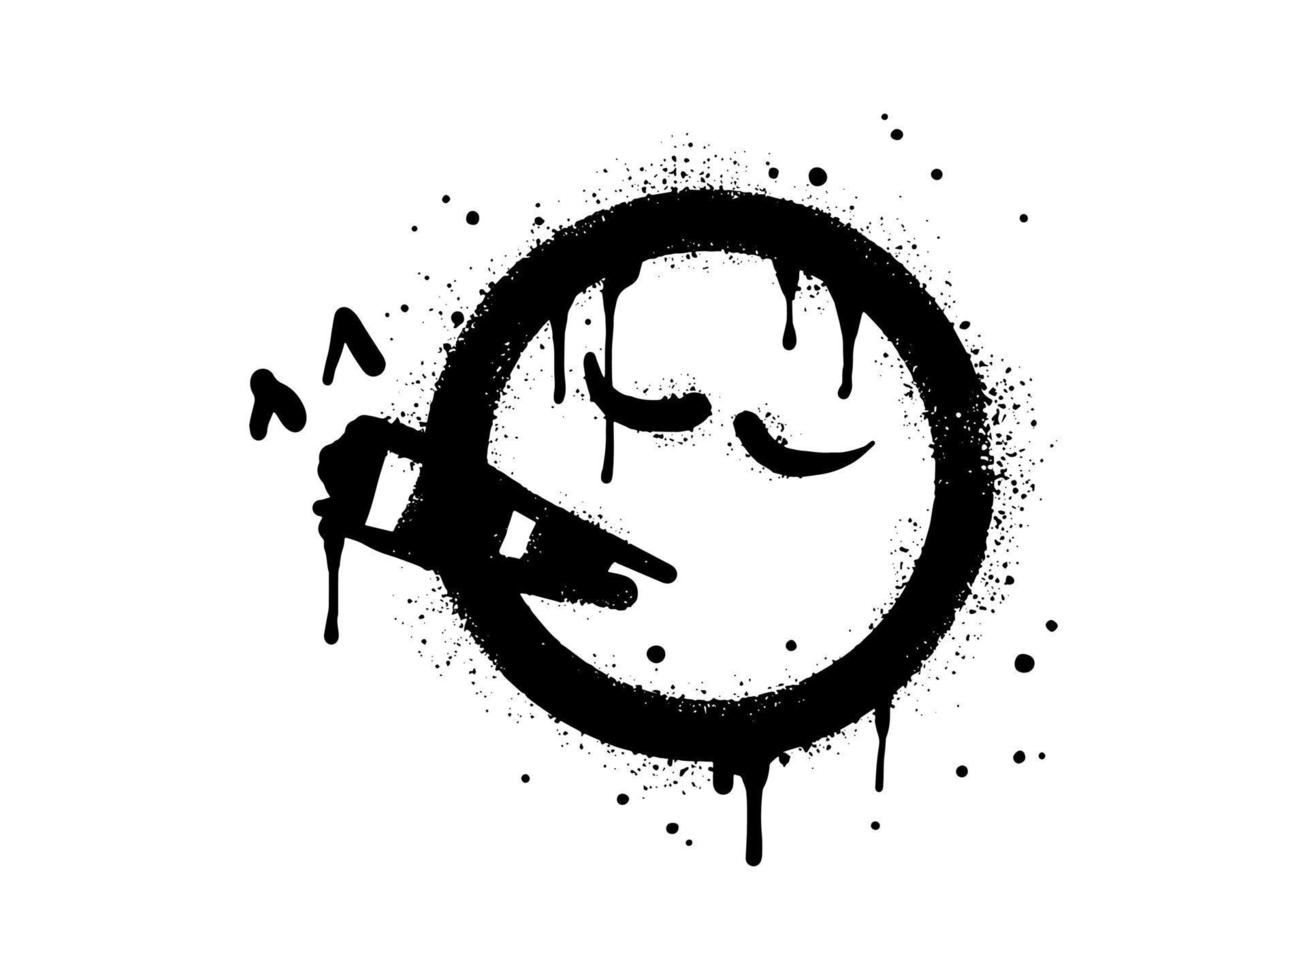 Smoking face emoticon character. Spray painted graffiti smoking face in black over white. isolated on white background. vector illustration